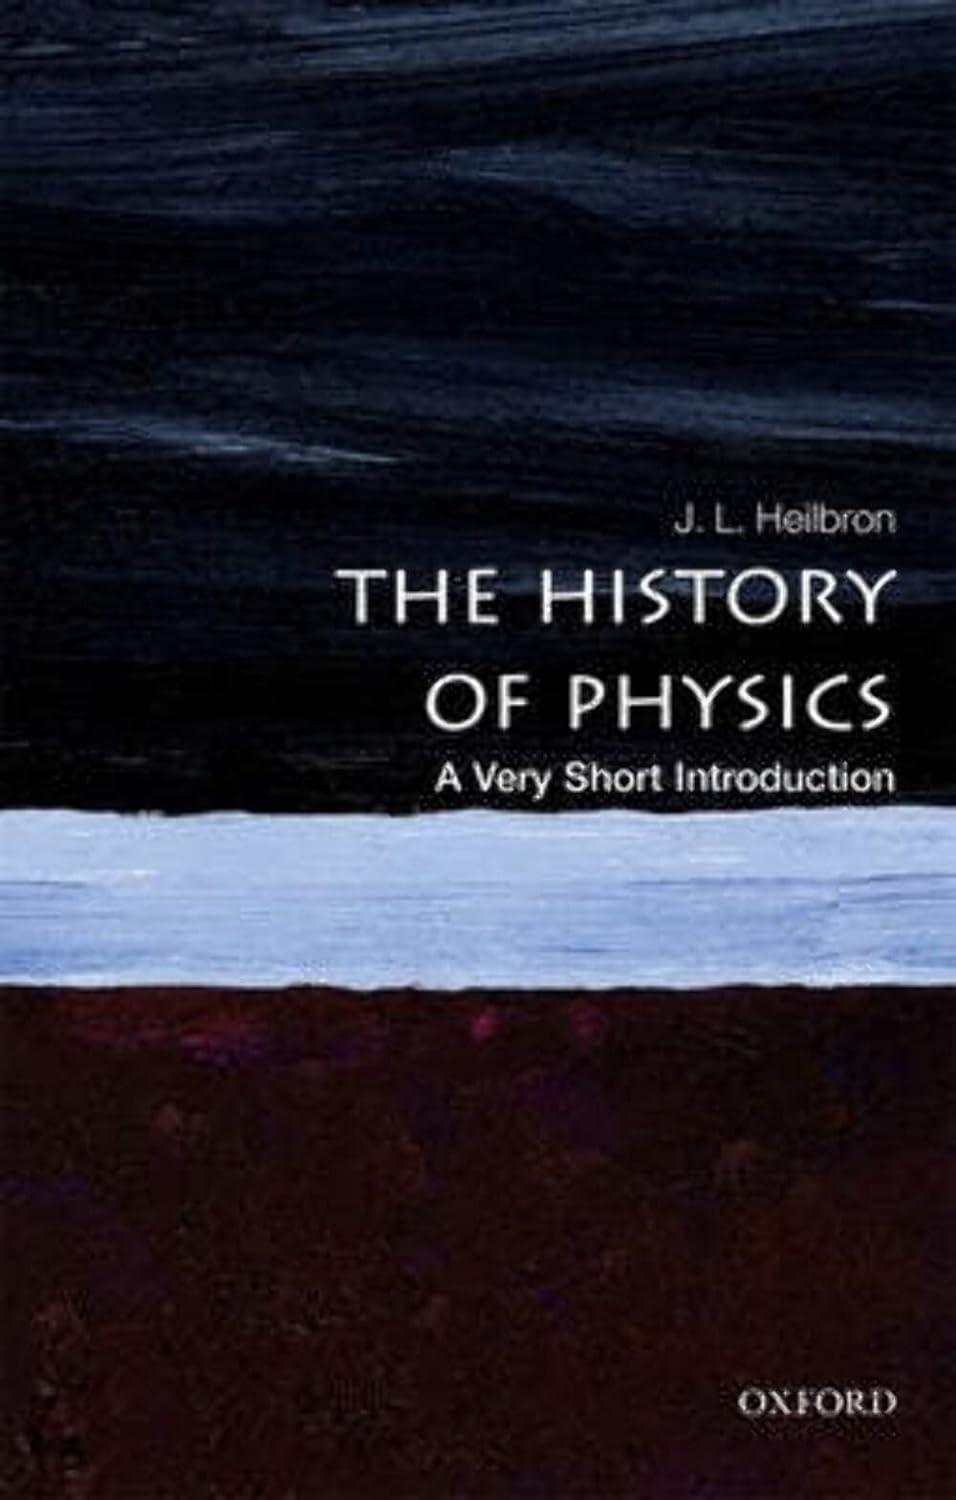 the history of physics a very short introduction 1st edition j. l. heilbron 019968412x, 978-0199684120